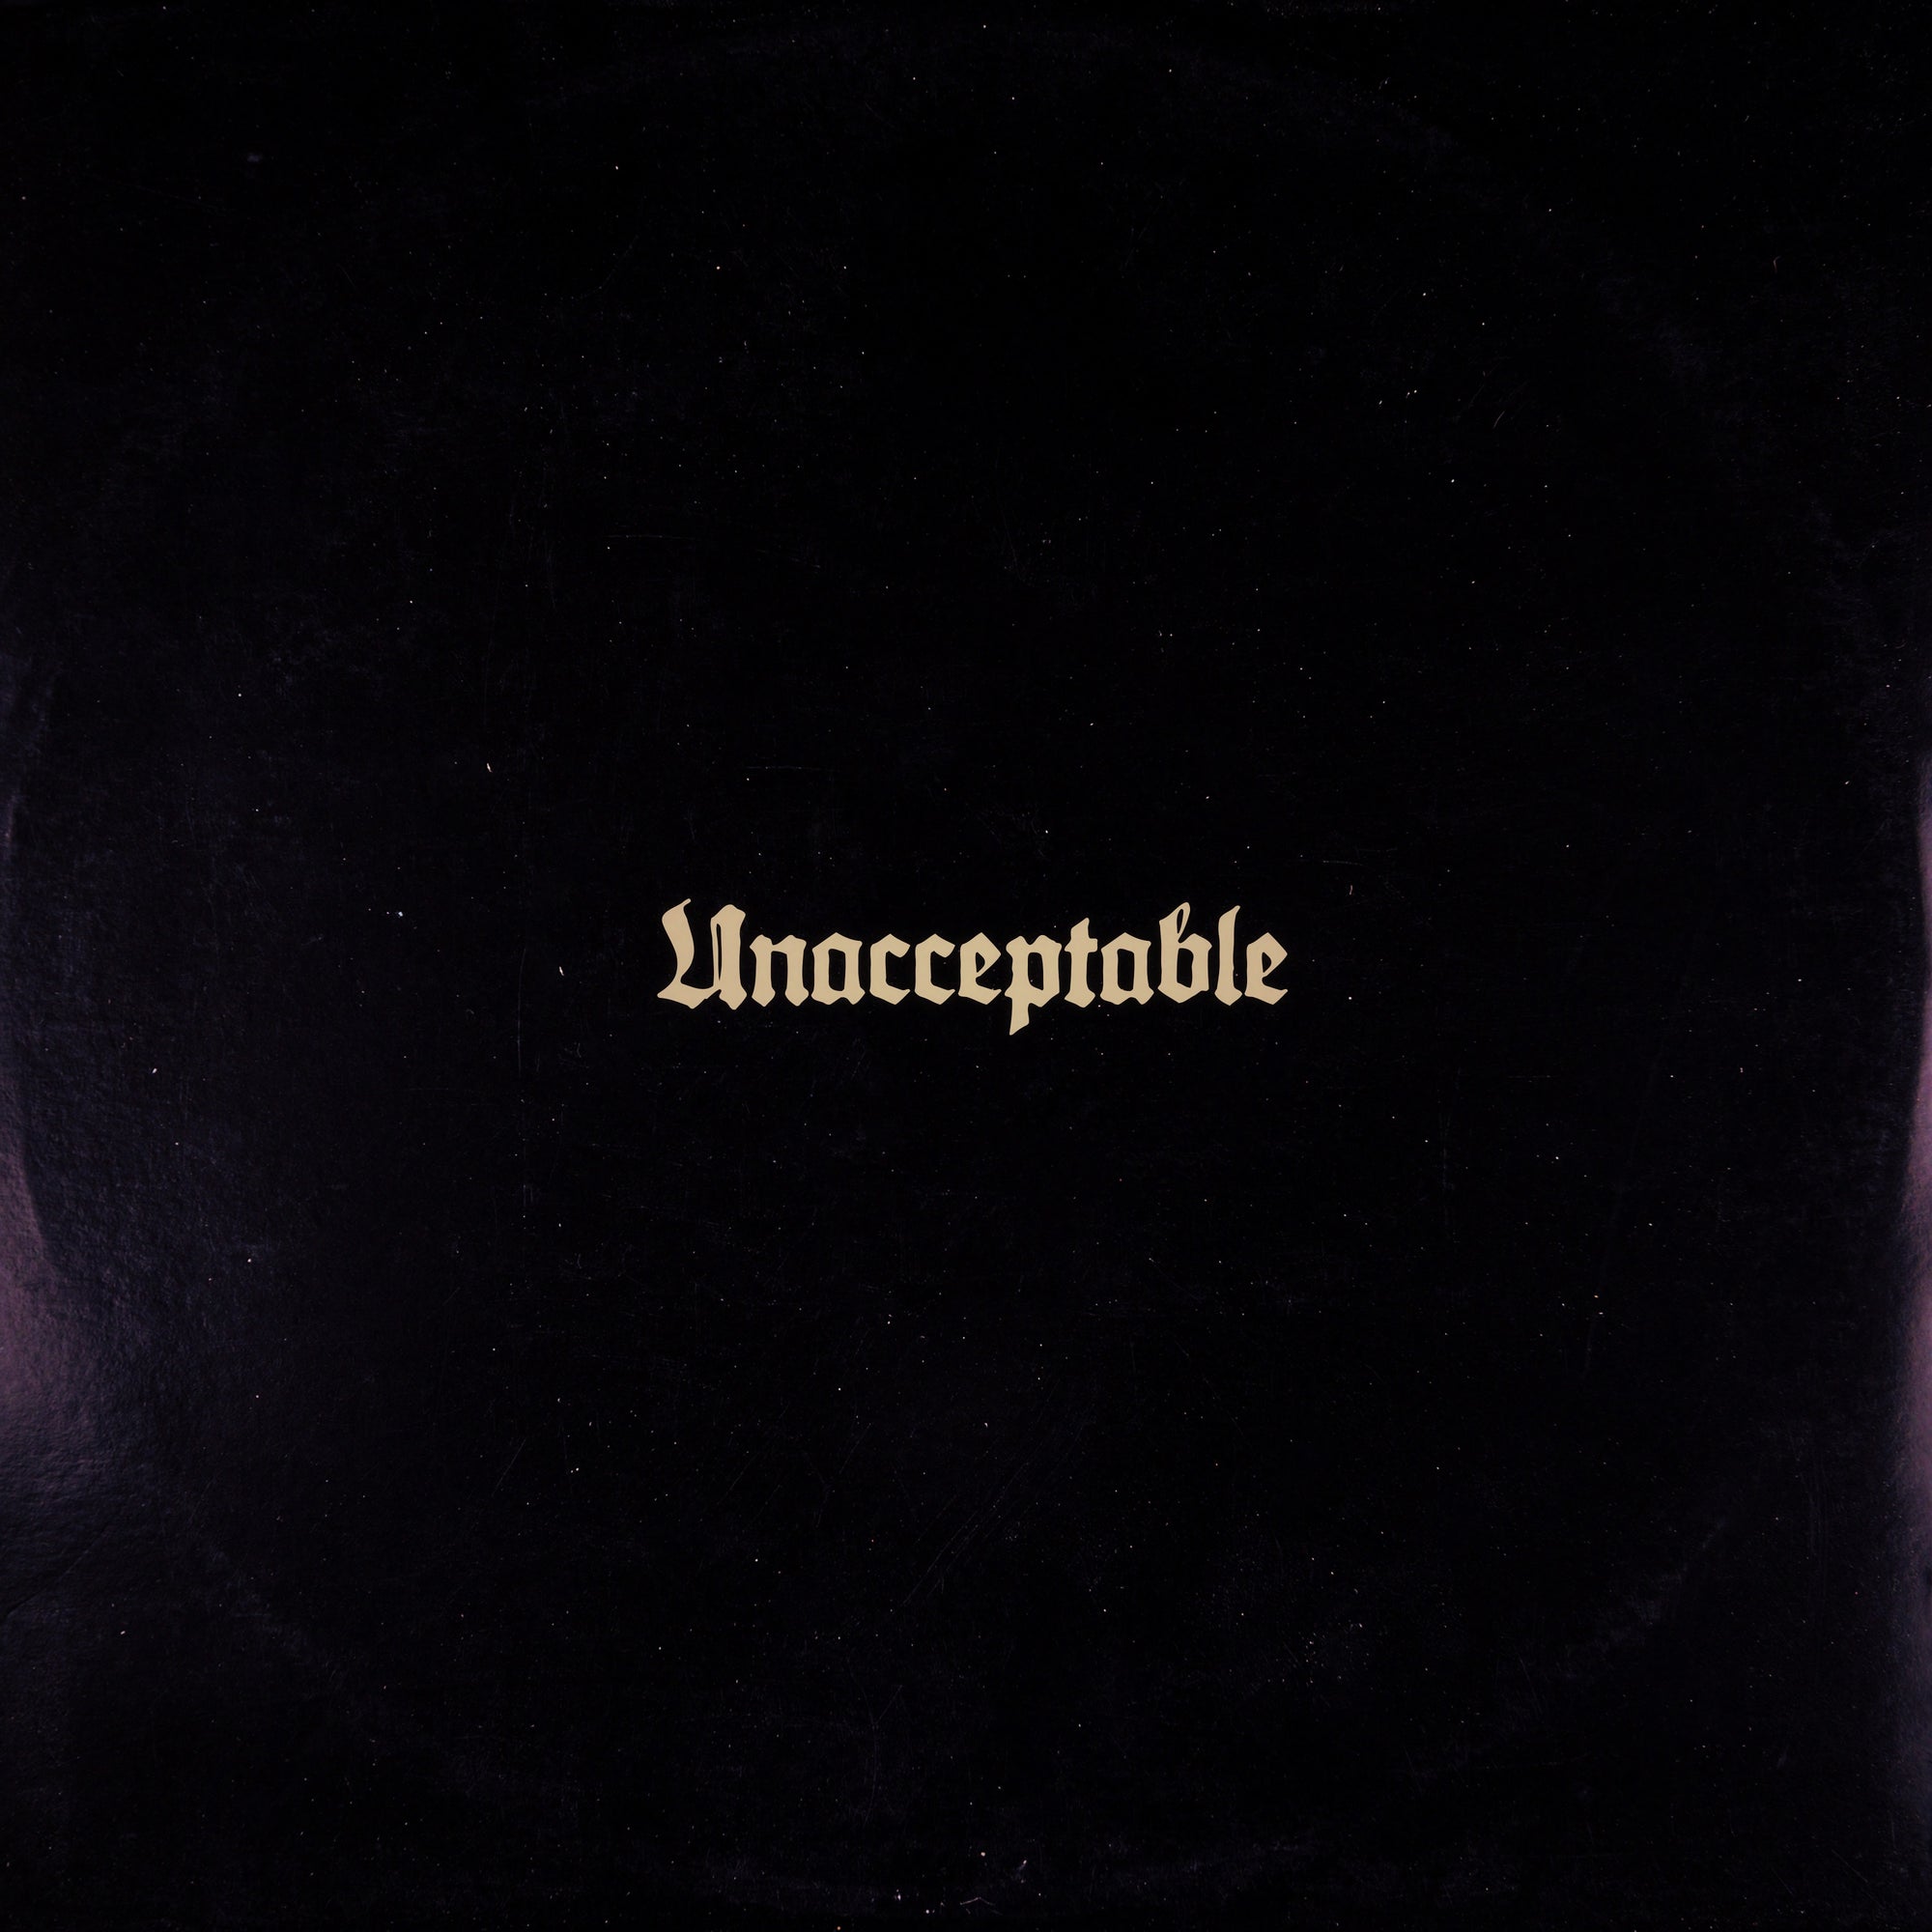 UNACCEPTABLE ft. David Goggins | New Single | This Week In Meaningwave January 20, 2023